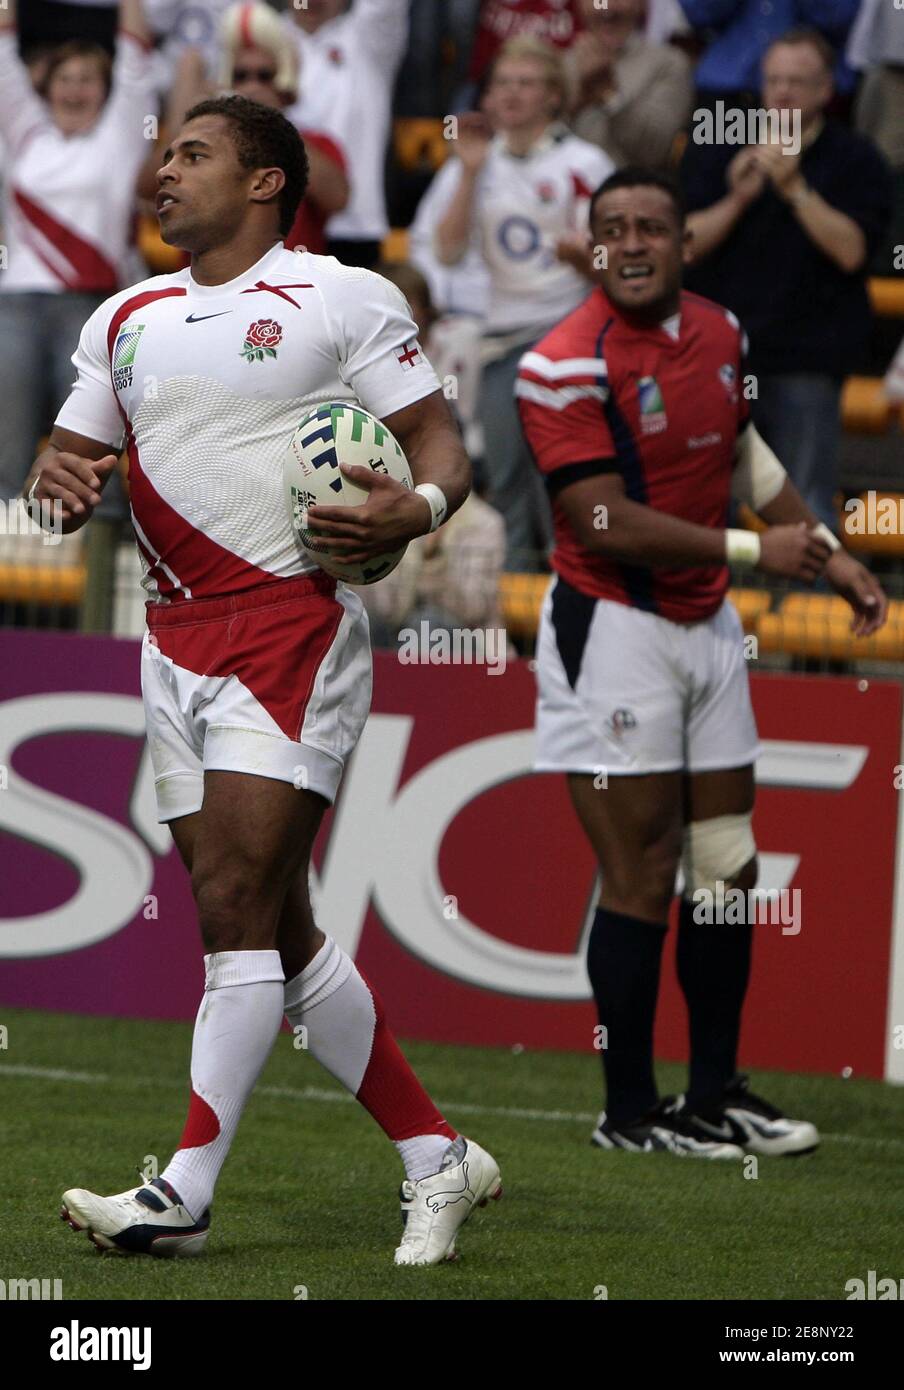 England S Jason Robinson Scores A Try During The 2007 Rugby World Cup Match England Vs Usa At The Bollaert Stadium In Lens France On September 8 2007 Photo By Pool Rugby 2007 Cameleon Abacapress Com